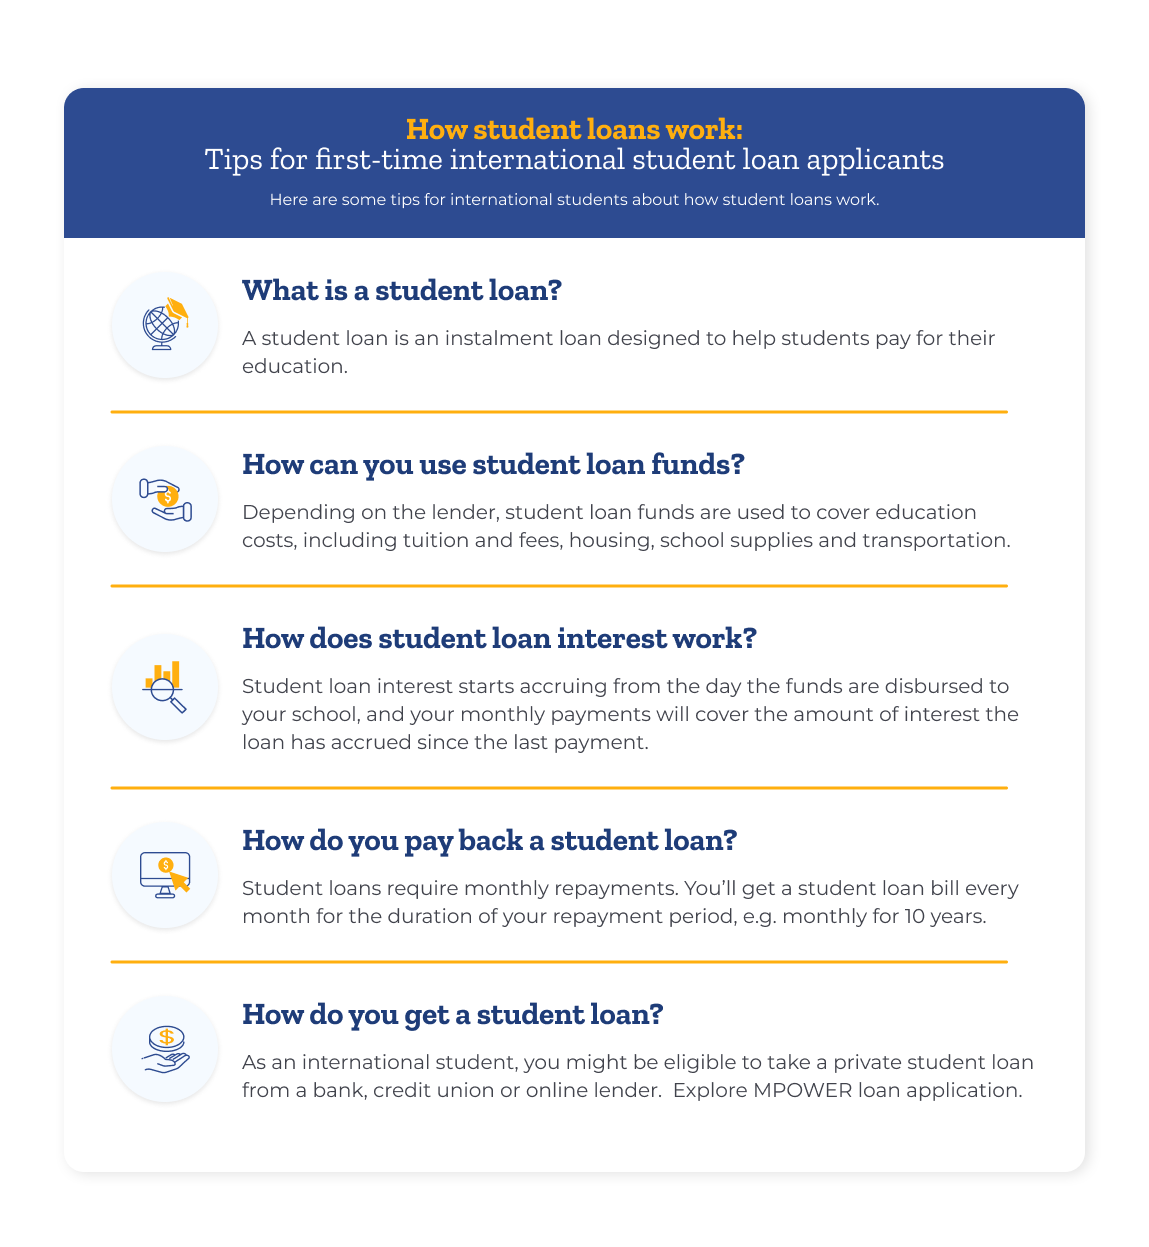 A guide on how student loan works for first-time international borrowers